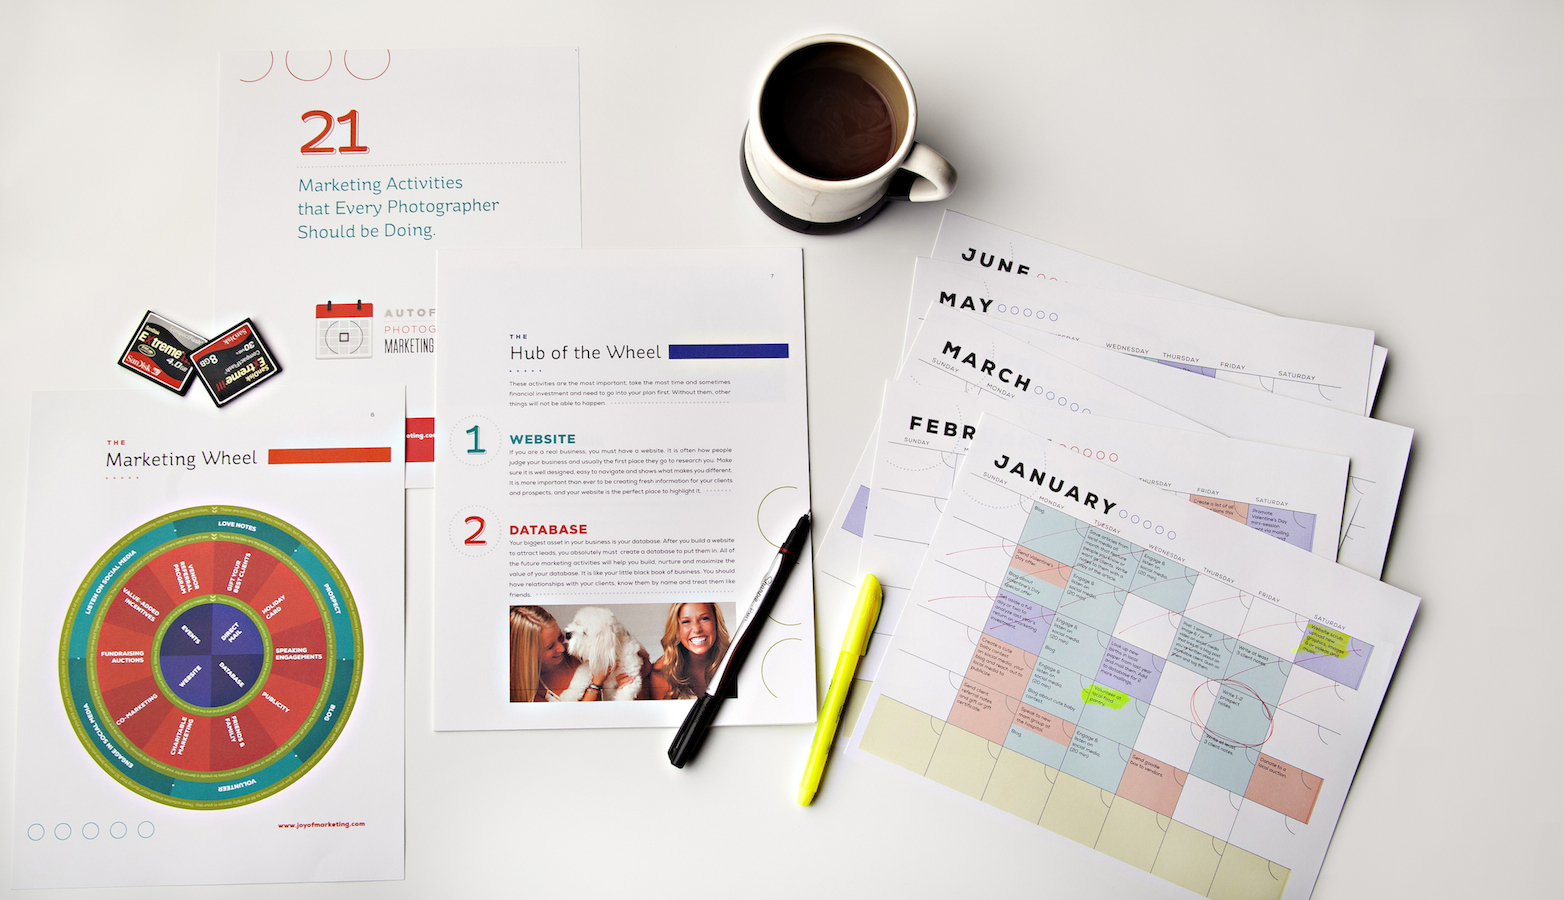 Marketing Calendar for growing a photography business